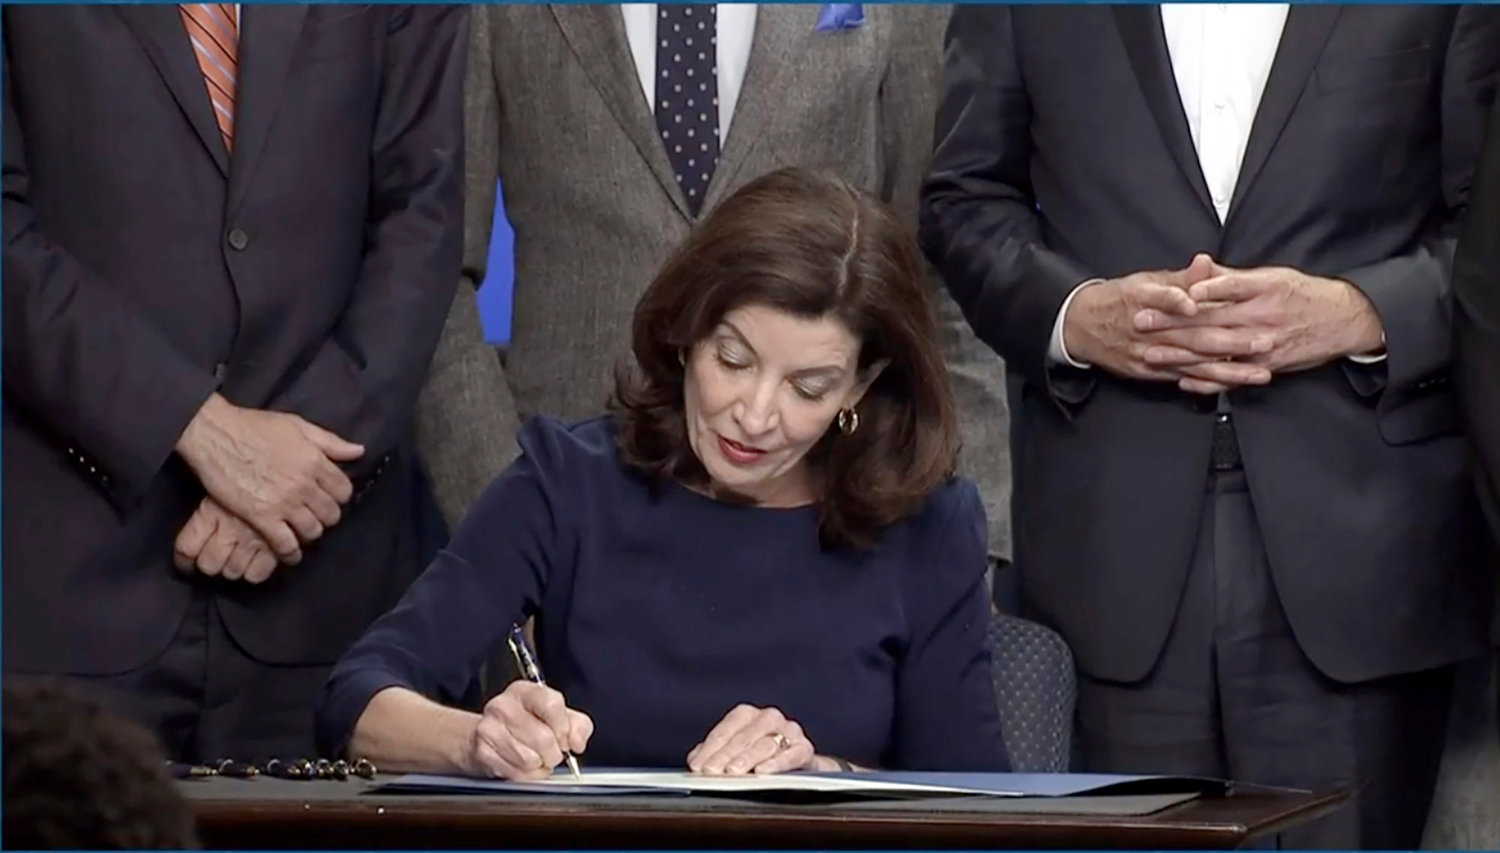 In this image taken from video, New York Gov. Kathy Hochul signs an executive order during a news conference, Wednesday, May 18, 2022, in New York.  New York would require state police to seek court orders to keep guns away from people who might pose a threat to themselves or others under a package of executive orders and gun control bills touted Wednesday by Hochul in the aftermath of a racist attack on a Buffalo supermarket.  (Office of the Governor of New York via AP)